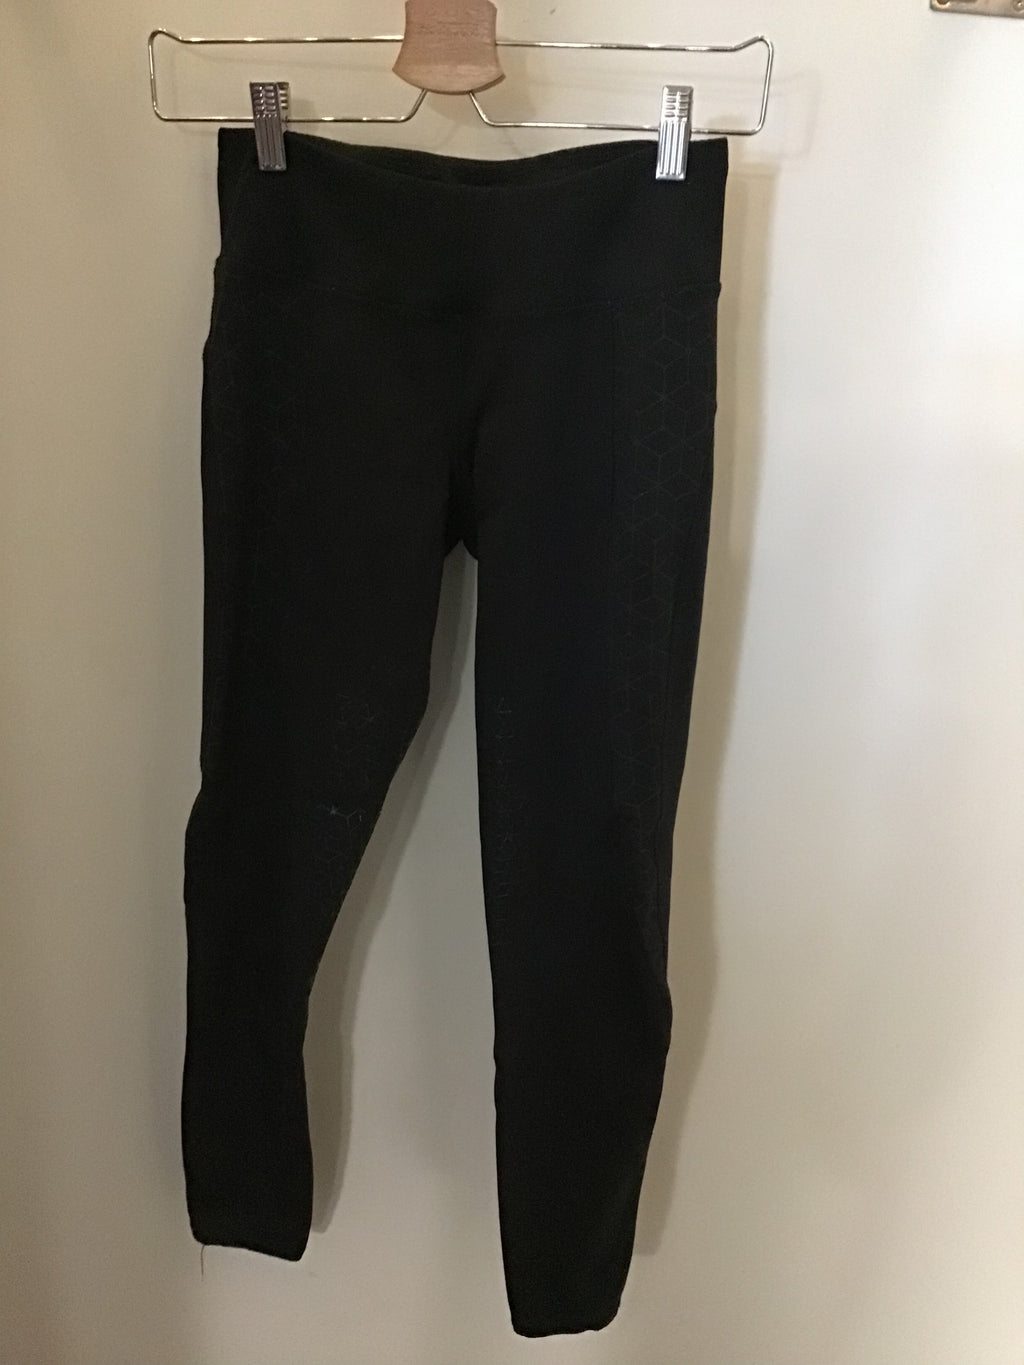 Elation riding tights size XS